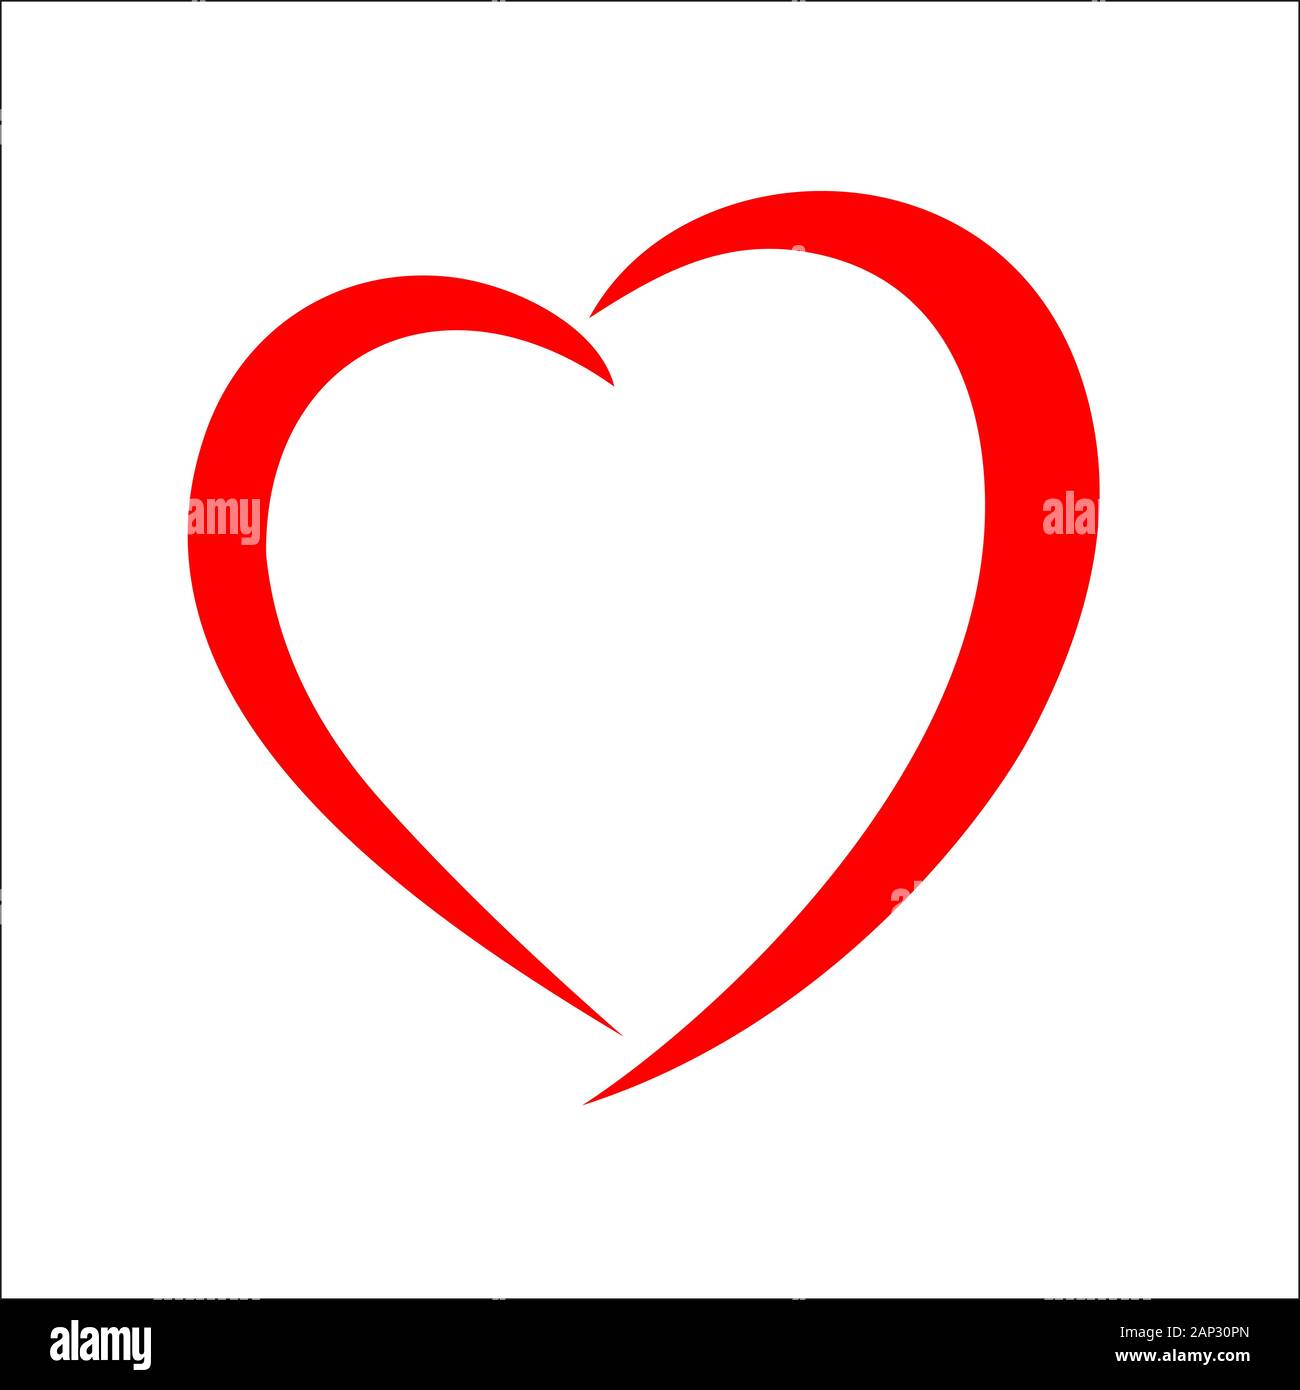 Red heart icon on white background love logo Vector Image